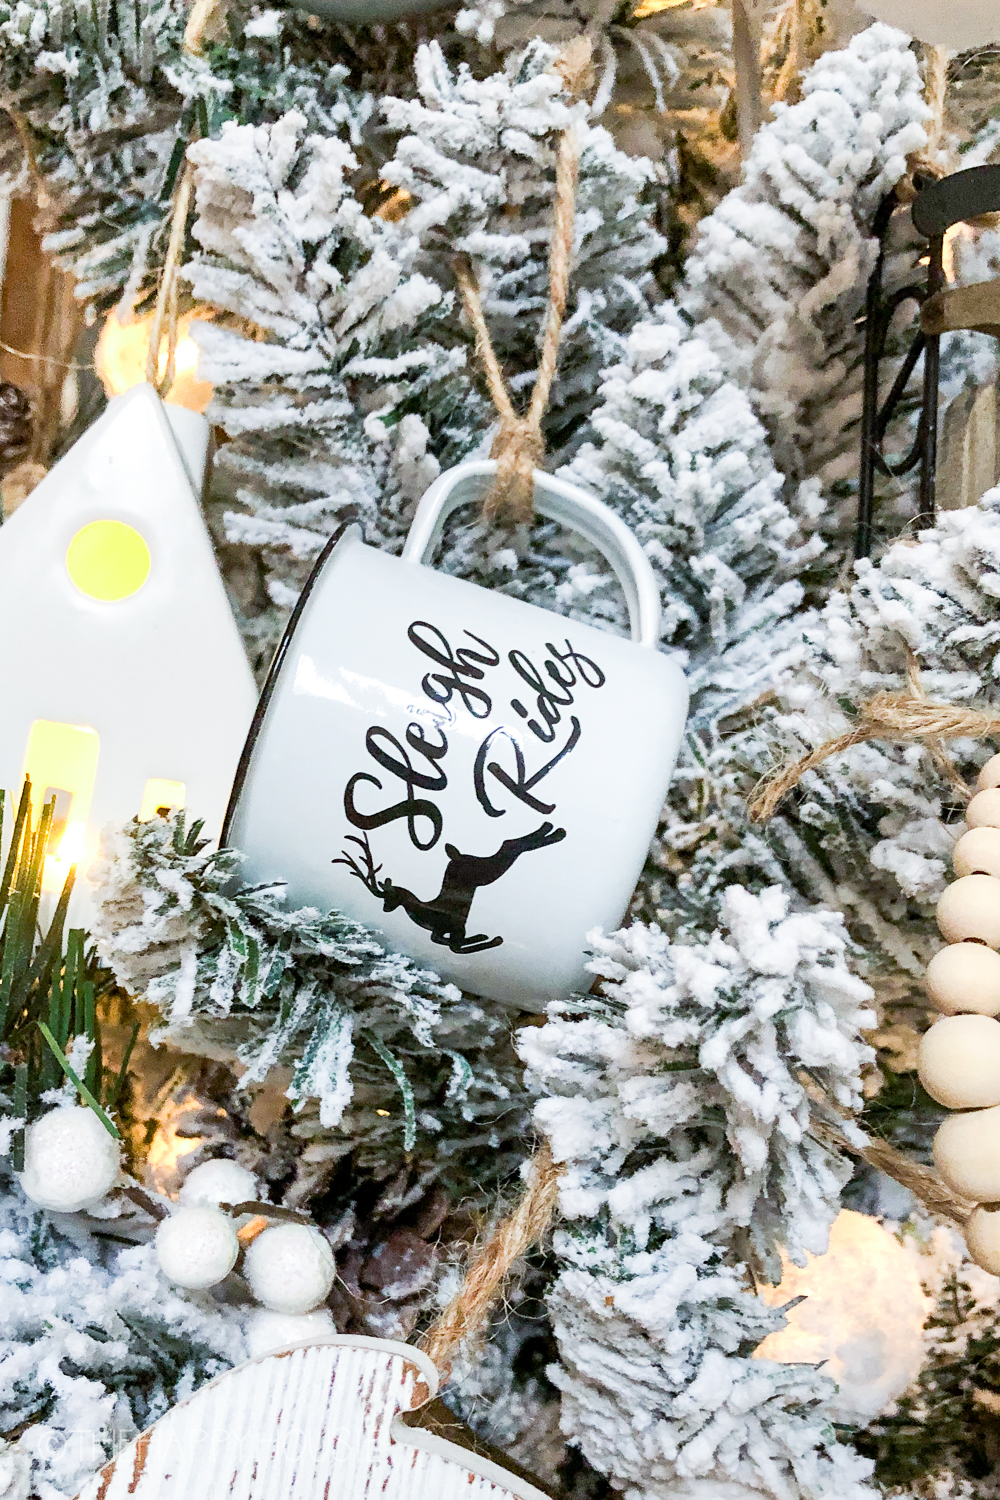 A mug that says Sleigh Ride is on the tree.